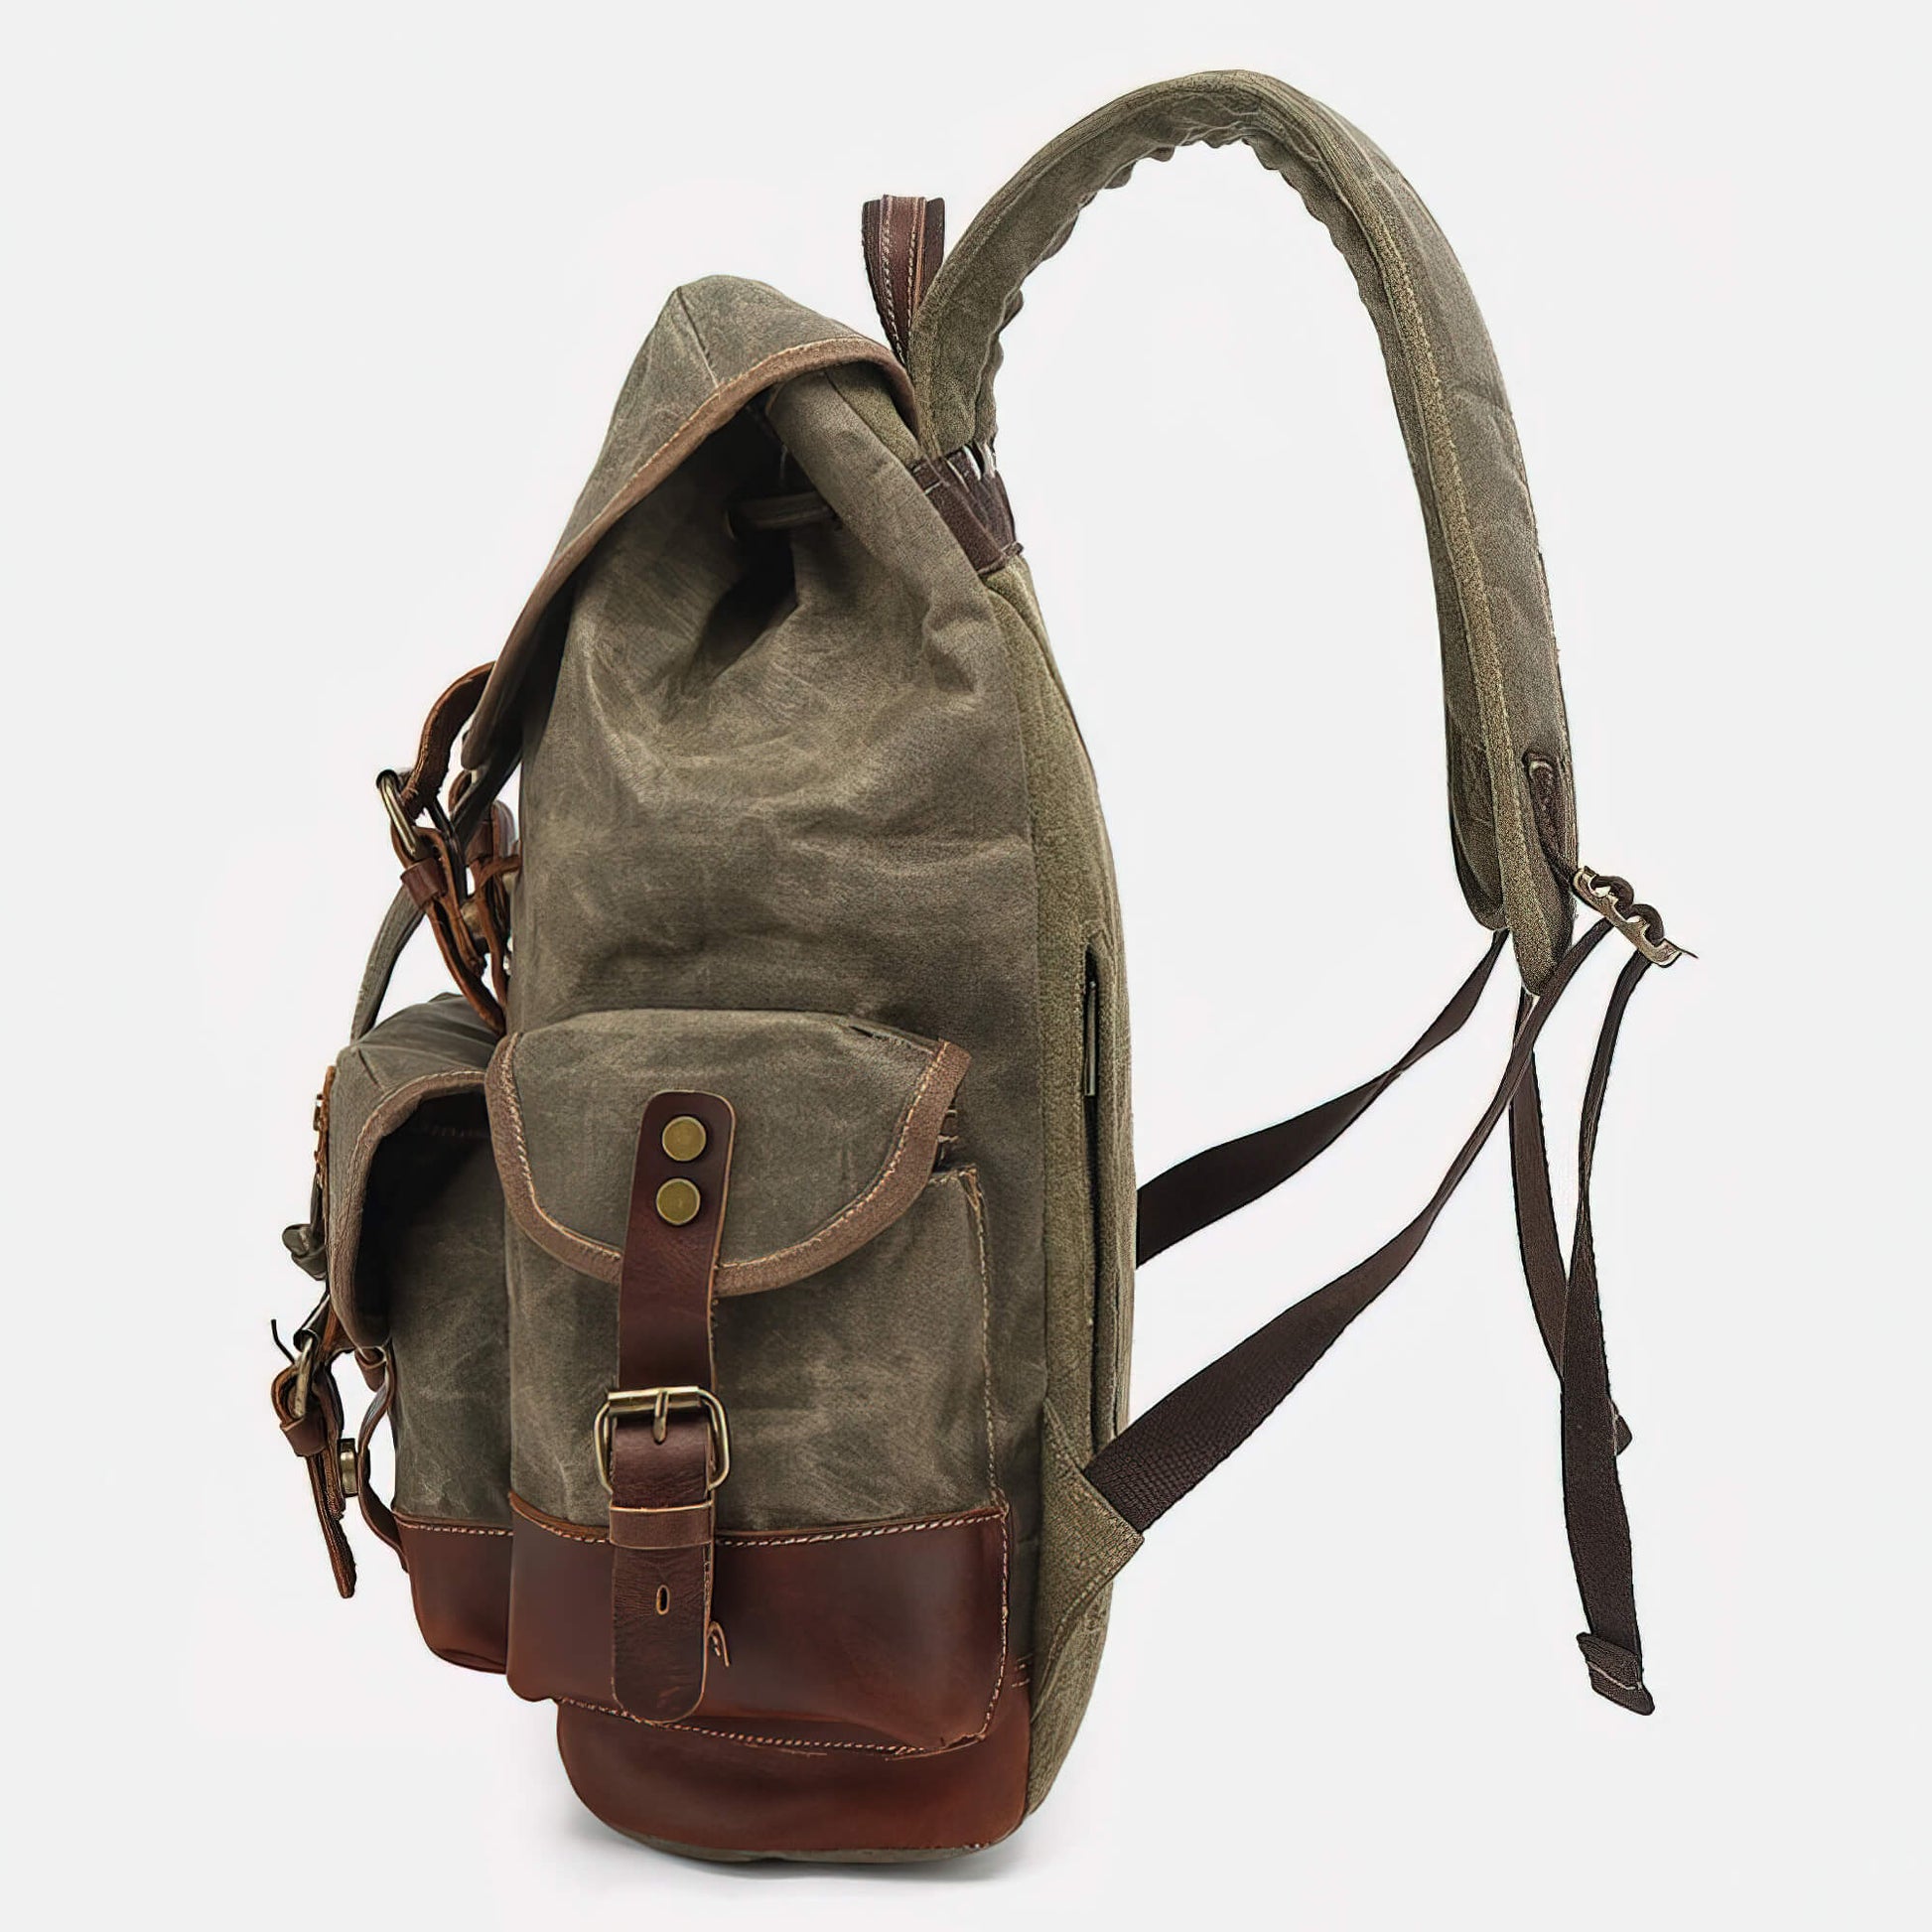 Waxed Canvas Backpack Rucksack 30L - Large Capacity, Genuine Leather,  Waterproof, Anti-theft - Hiking, Bushcraft – PaCanva